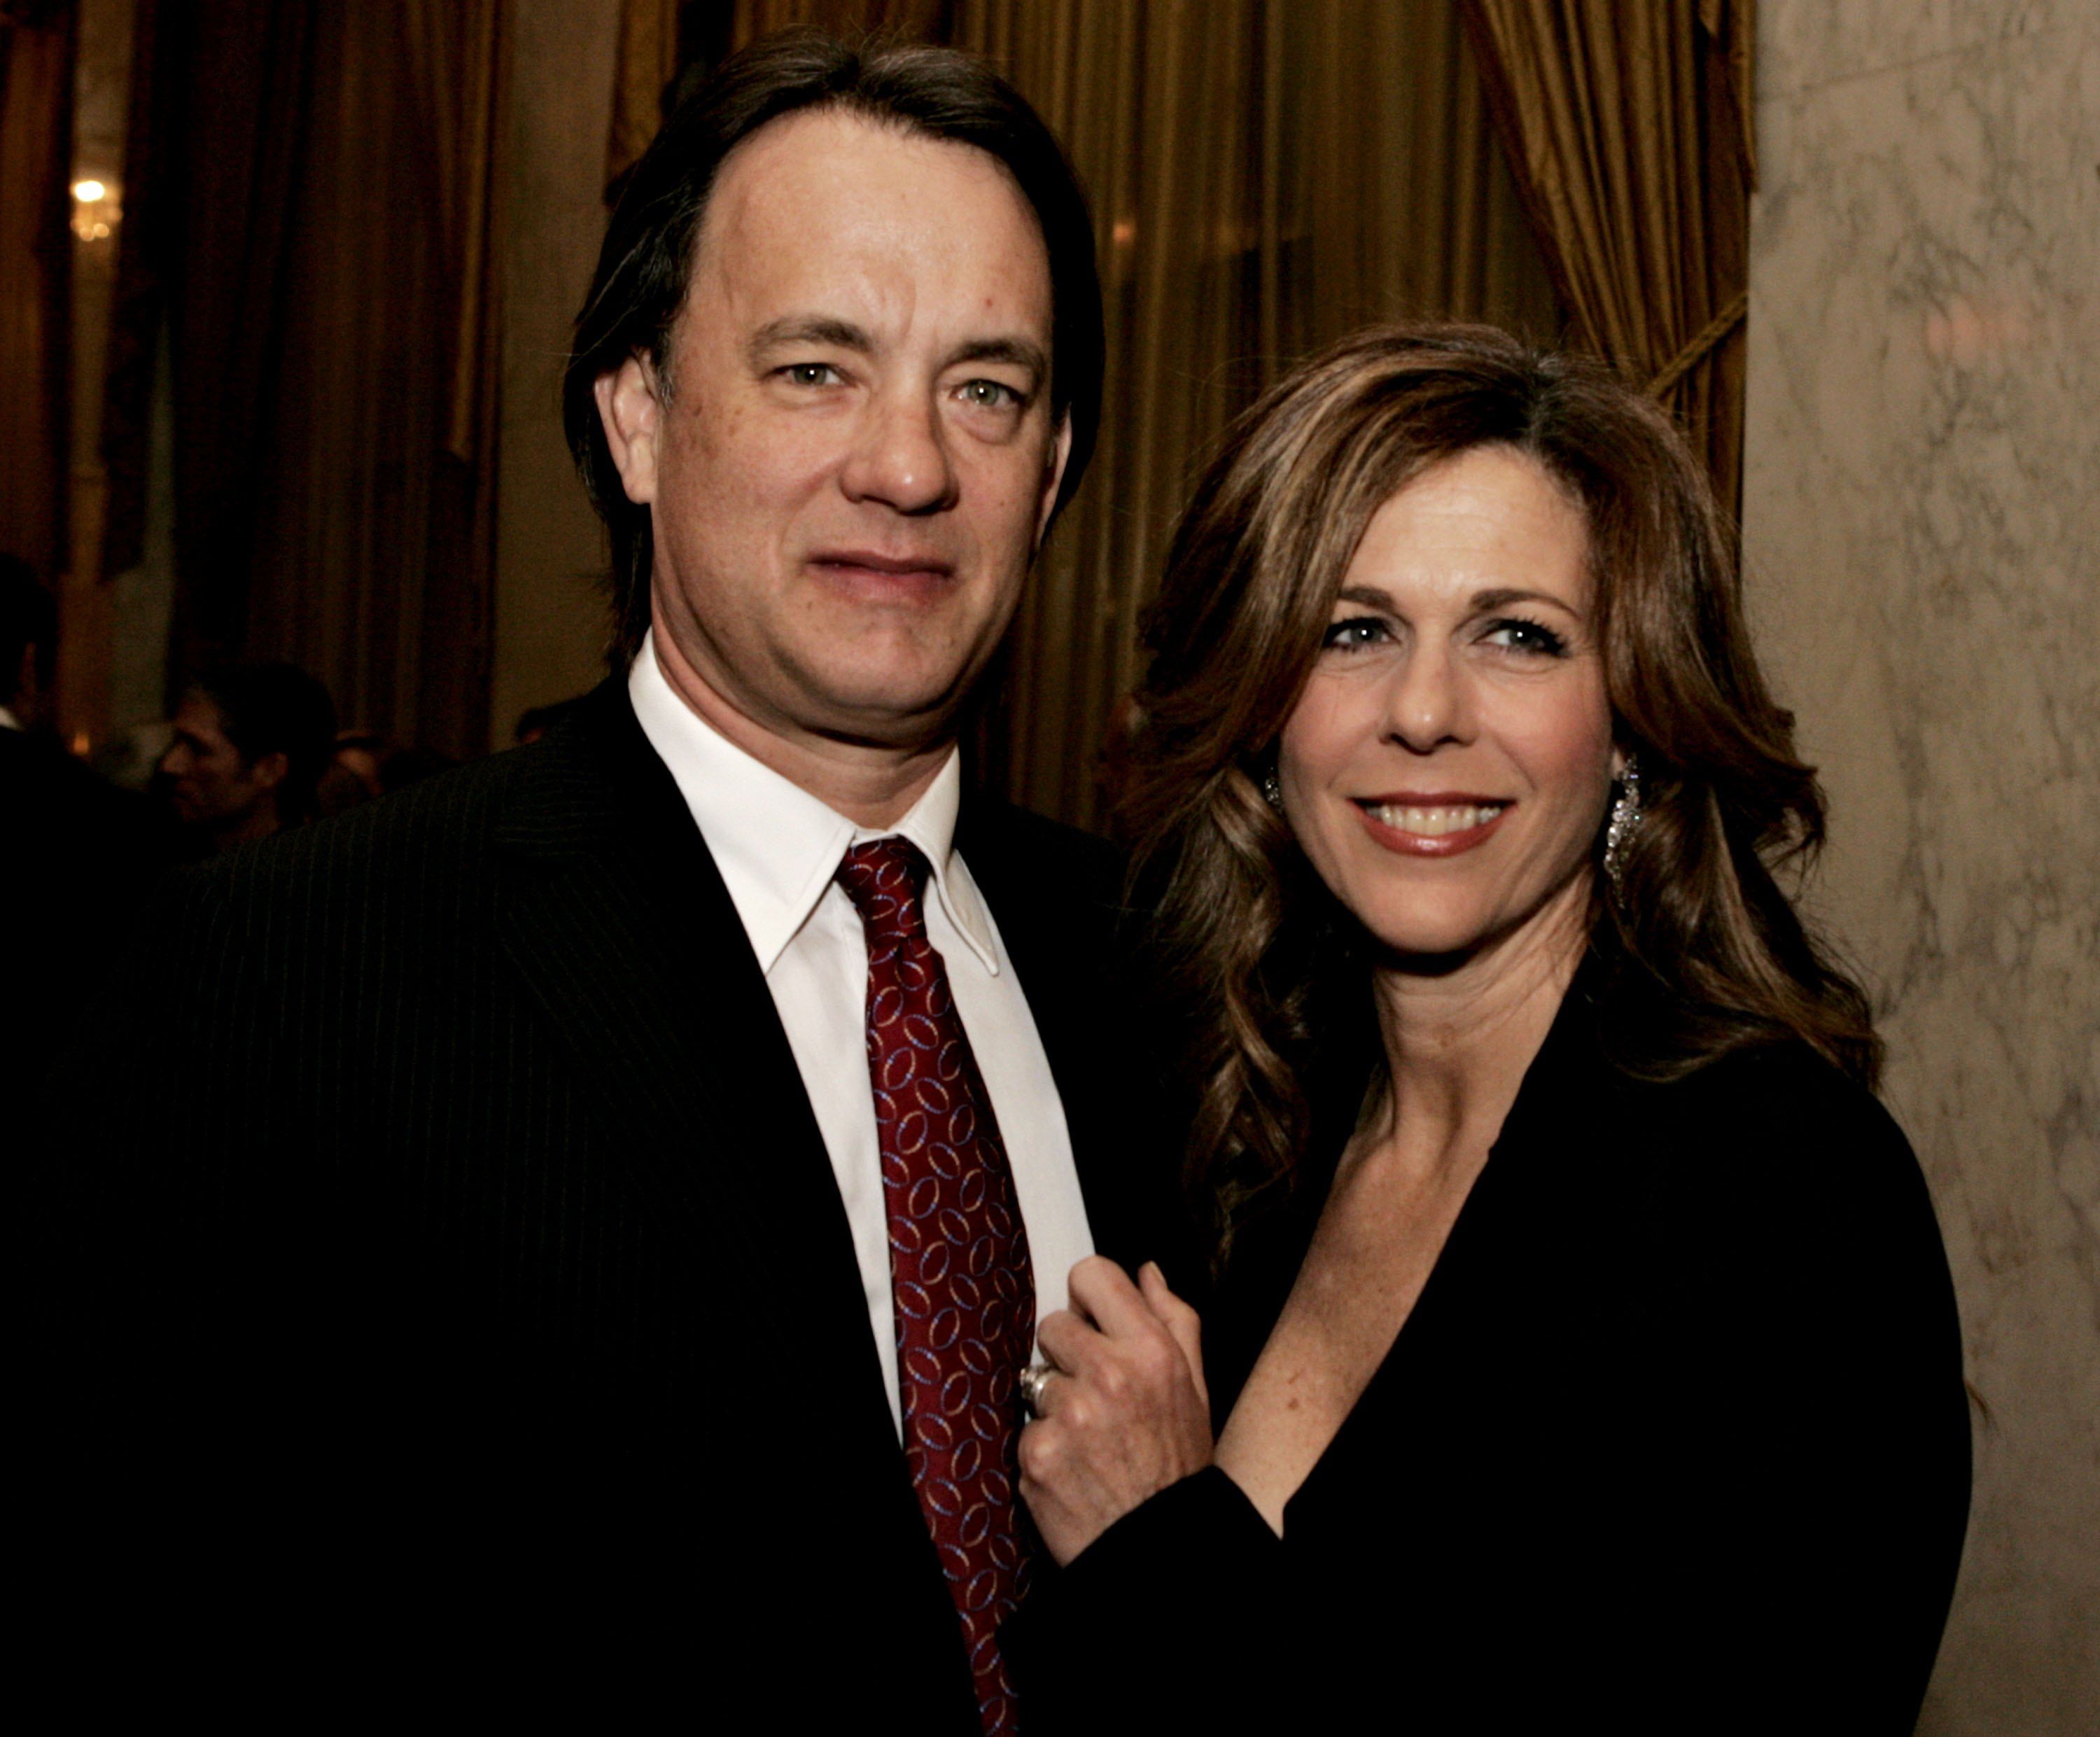 Tom Hanks and Rita Wilson during the EIF's Women's Cancer Research Fund honoring Melissa Etheridge at Saks Fifth Avenue's Unforgettable Evening on March 1, 2006 at the Regent Beverly Wilshire Hotel in Beverly Hills, California. | Source: Getty Images